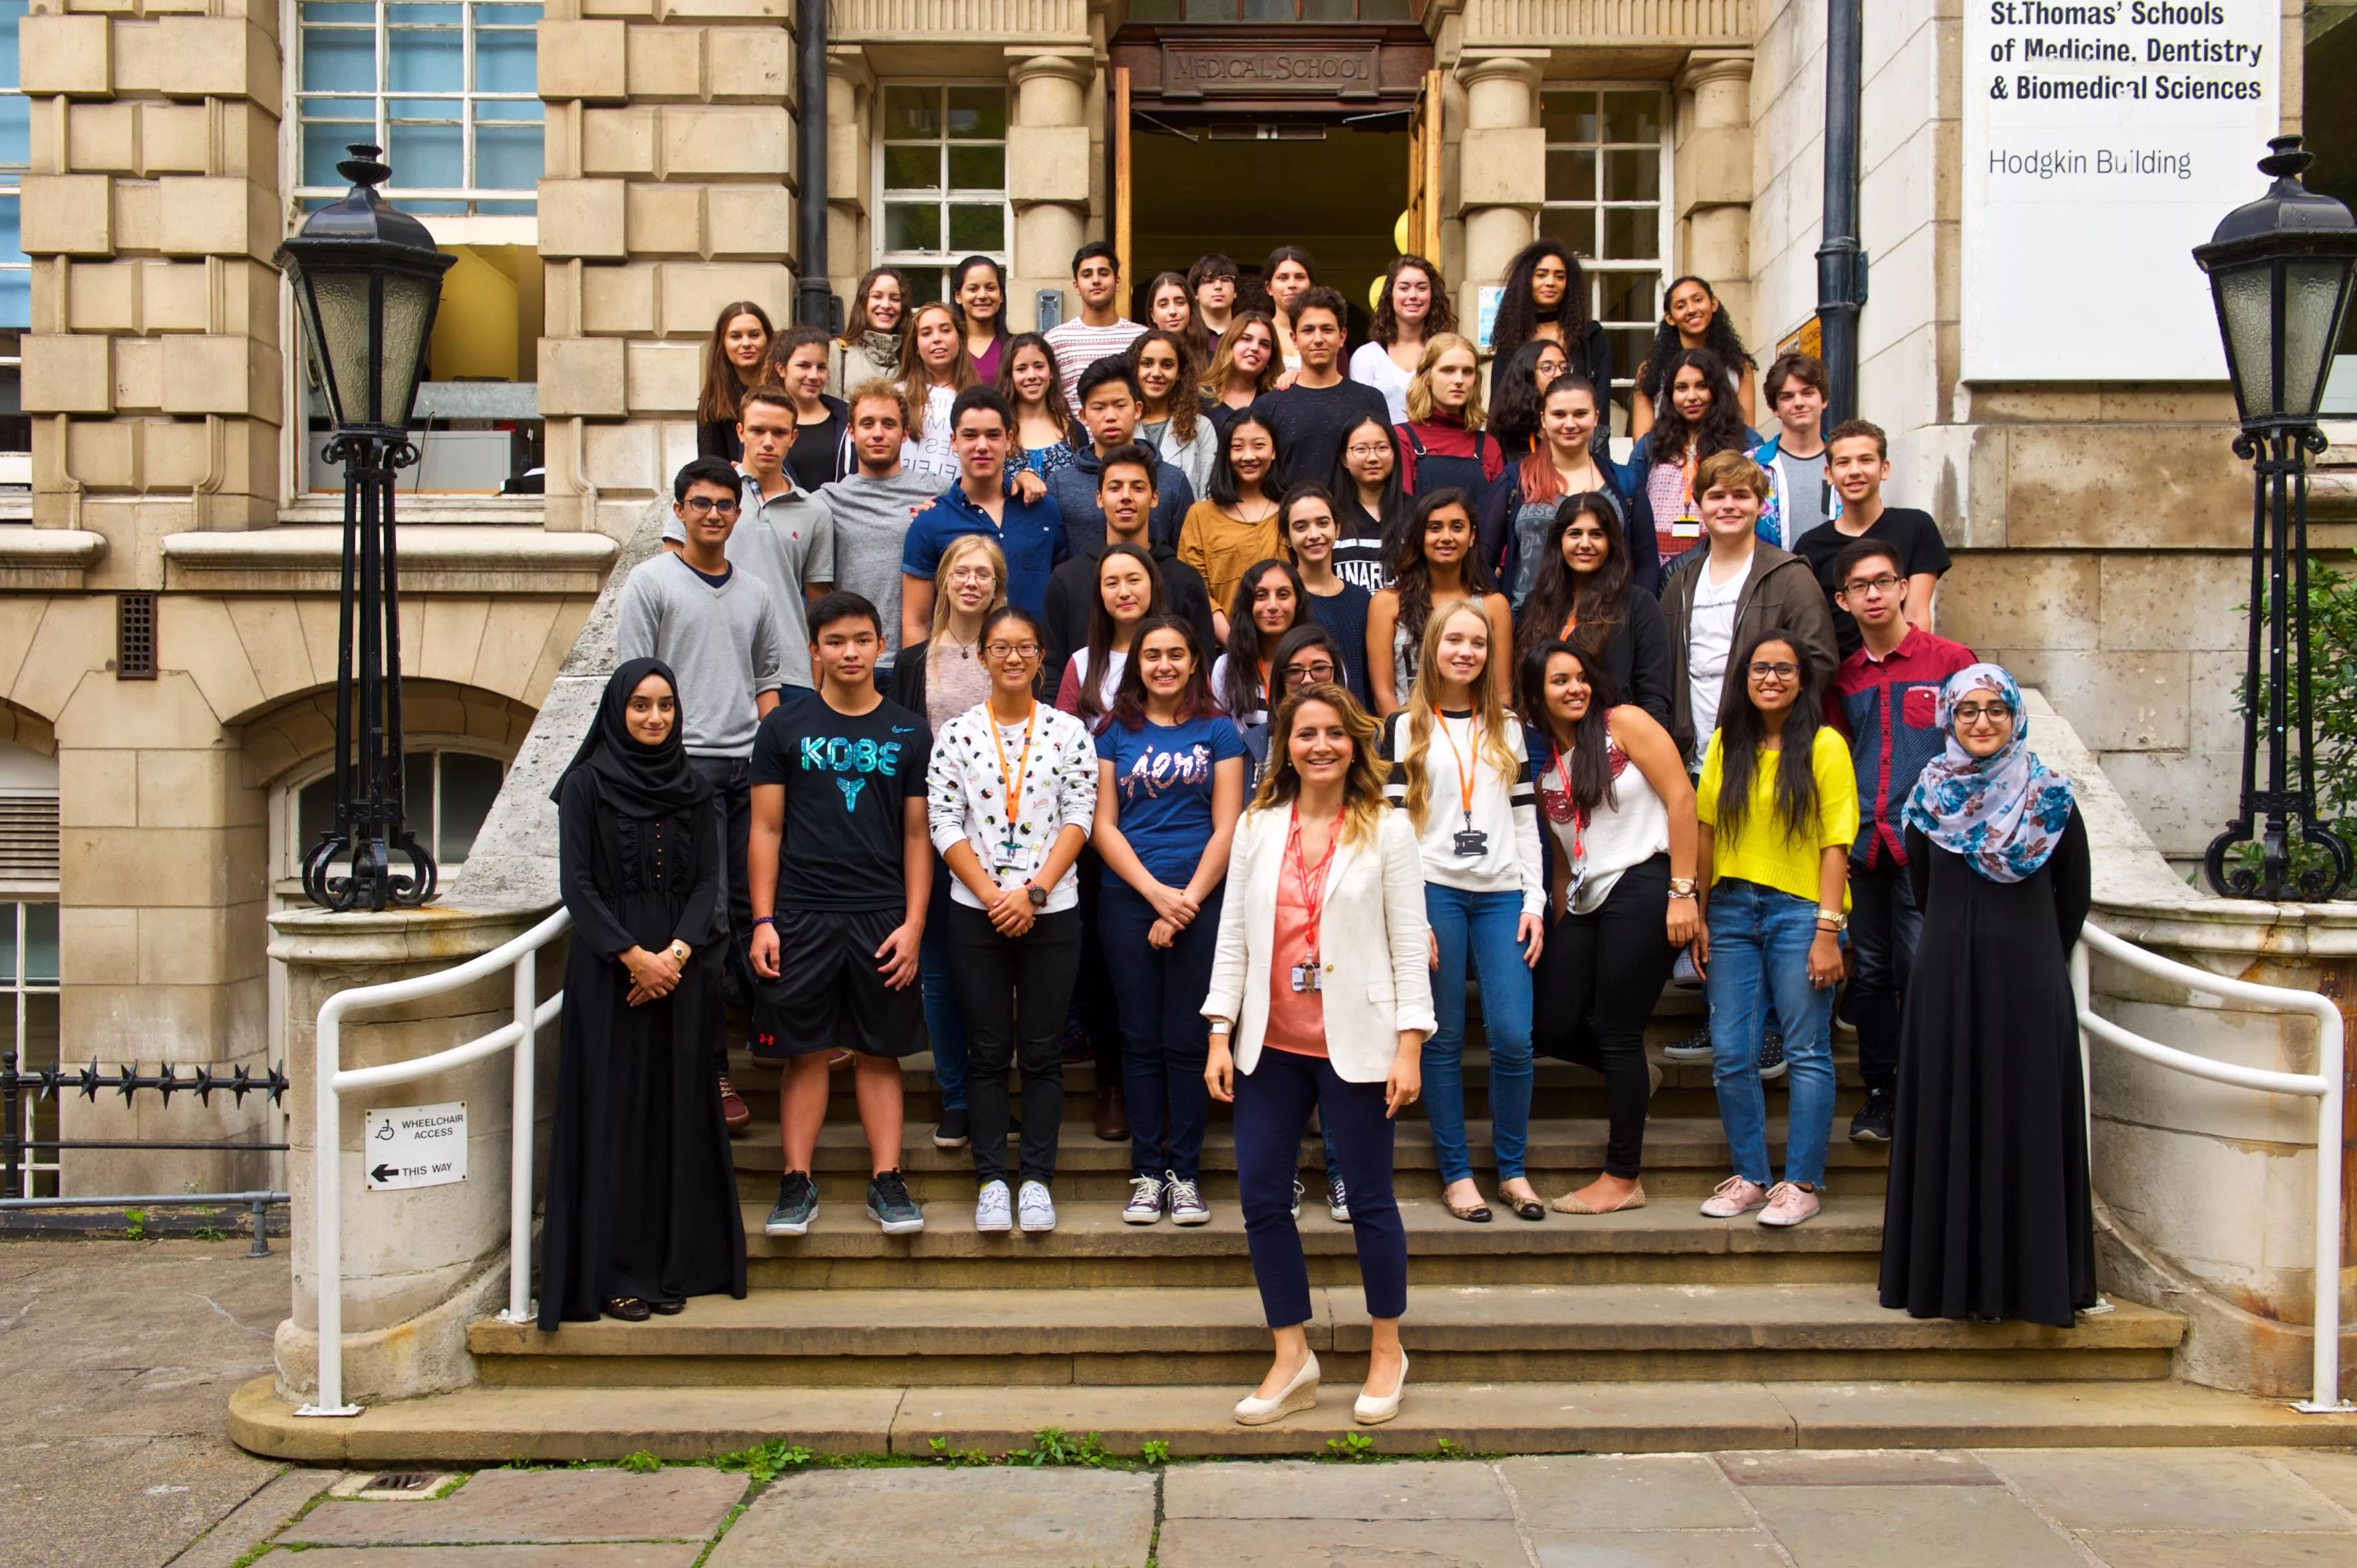 medical students and their lecturer gatheres on the steps of the Hodgkin Building, Guy's Campus, King's College London.